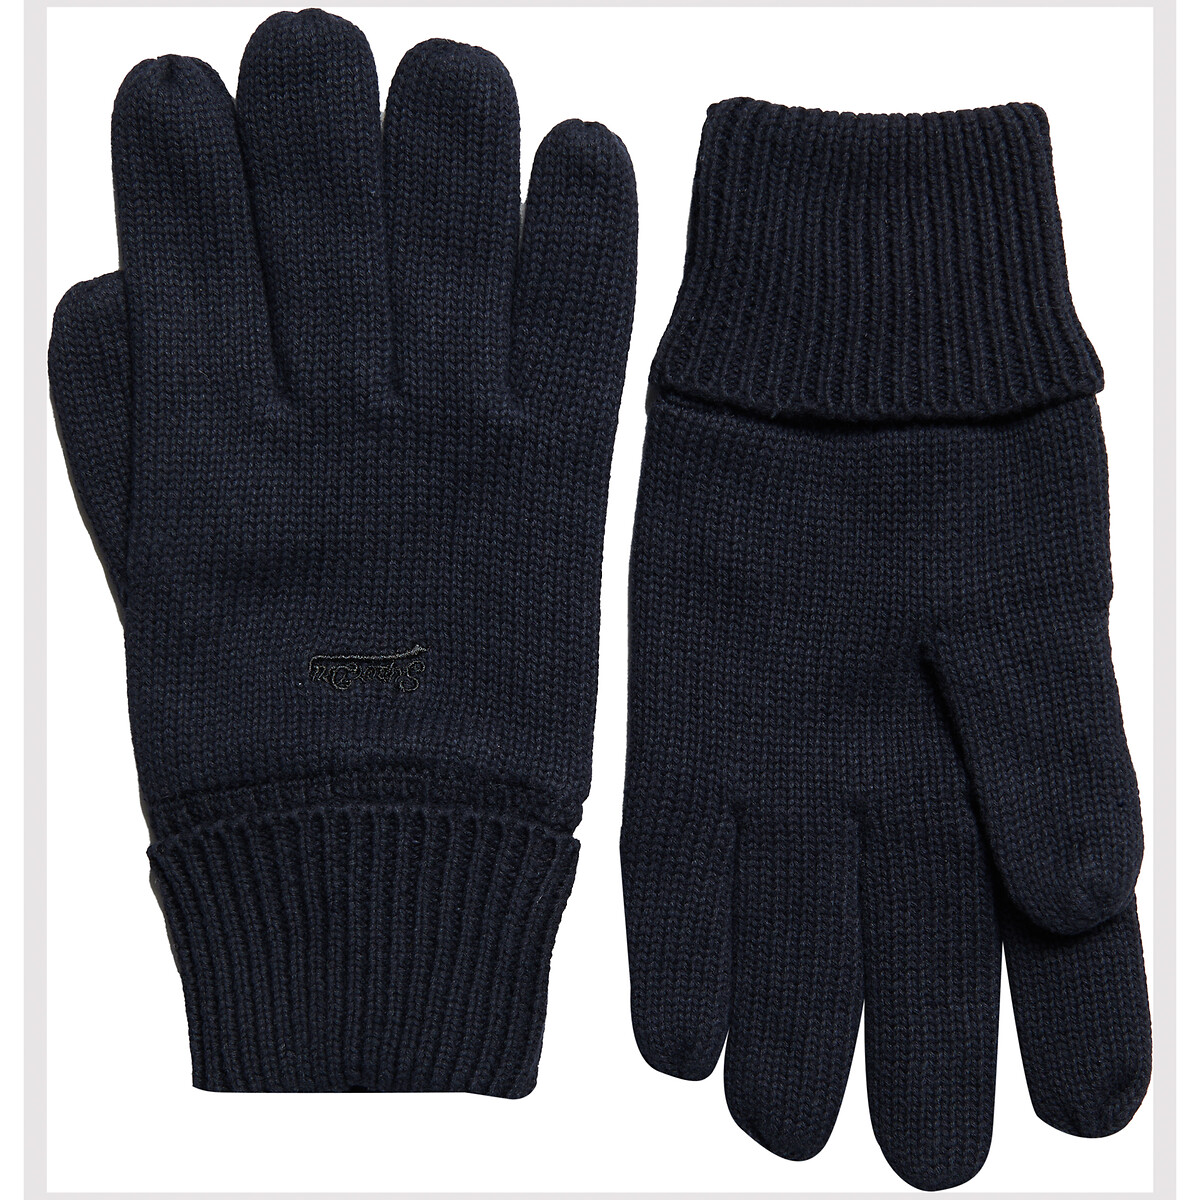 Pair of Cotton Gloves